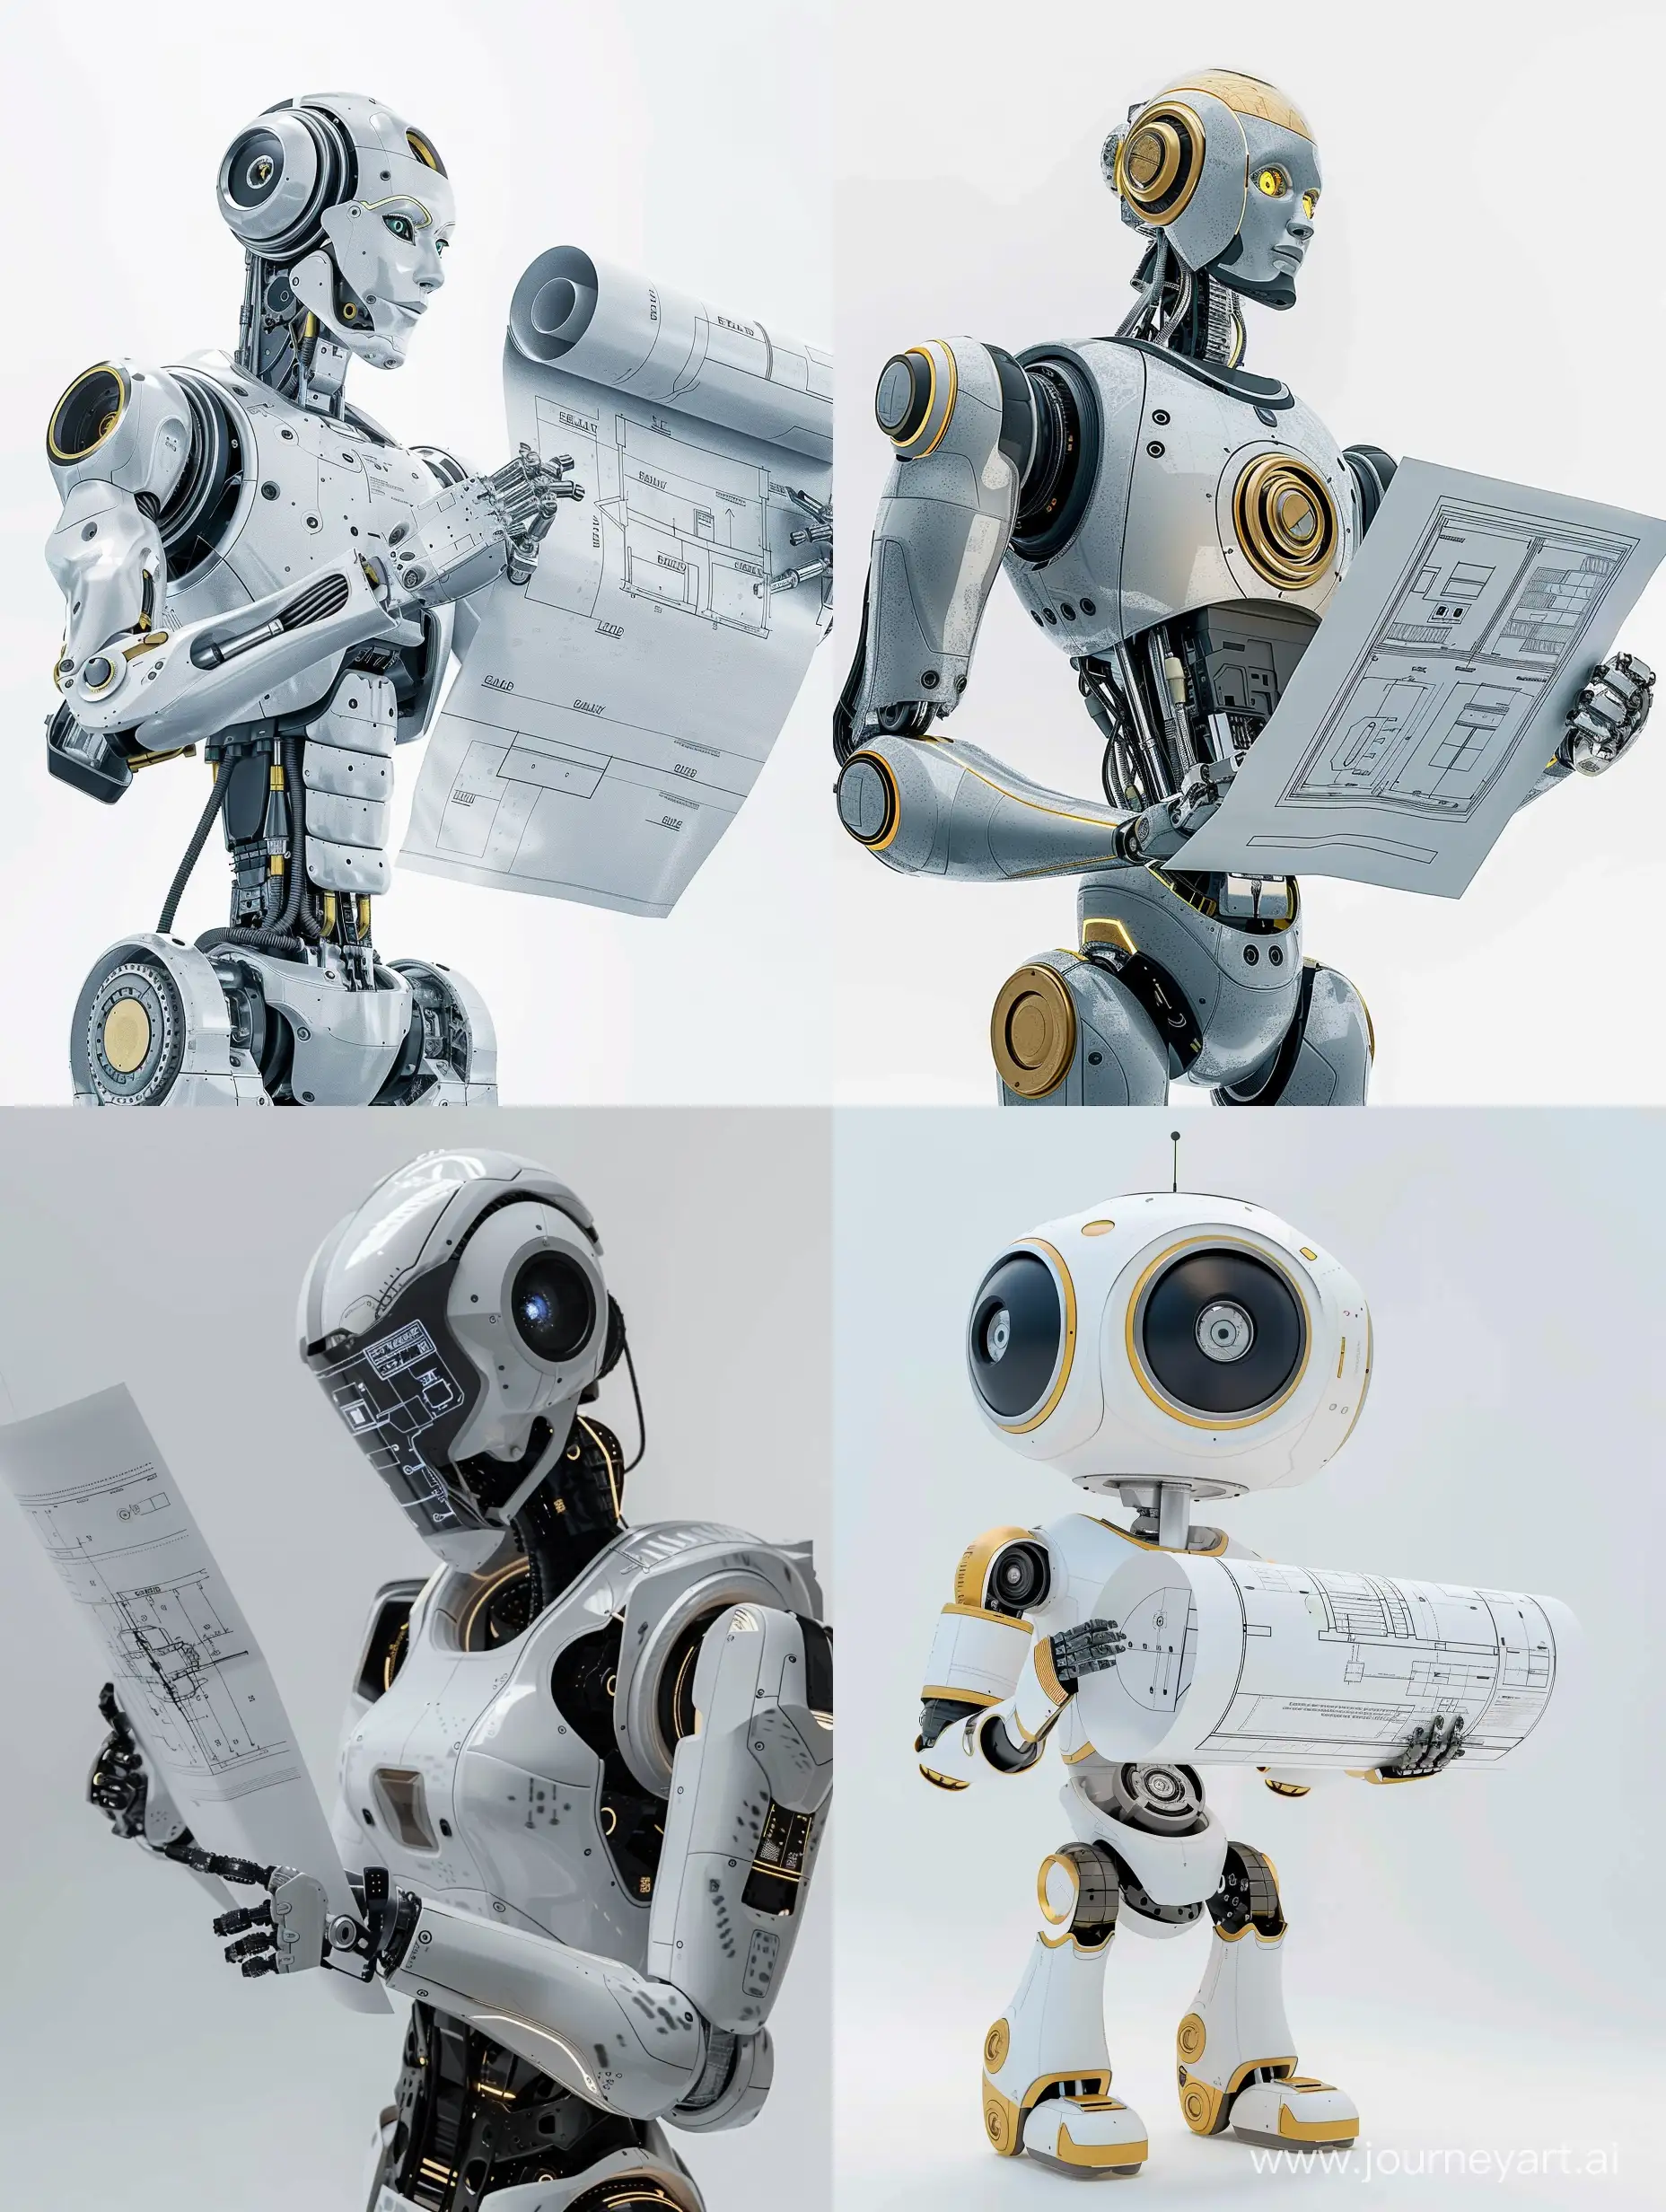 clever beauty robot which holding a blueprint, white background